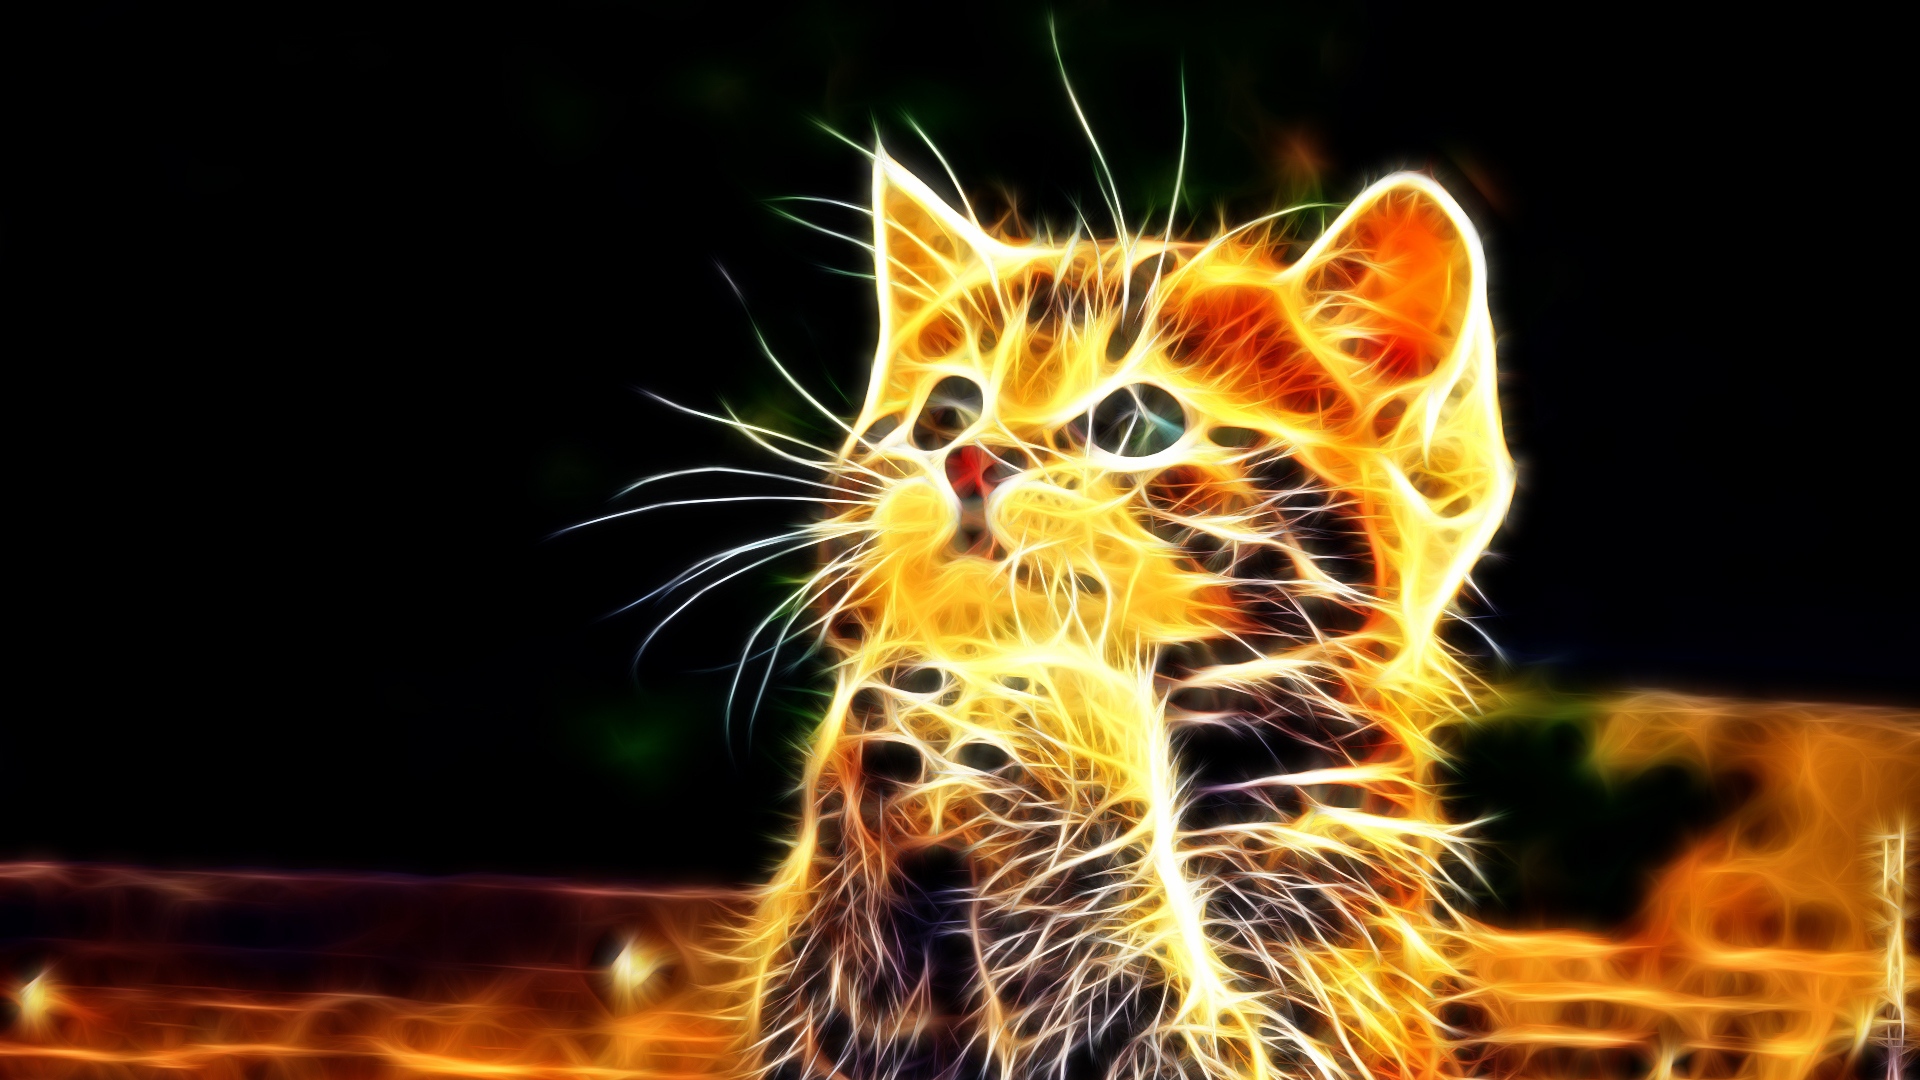 Kitty Furry Paws Cute Abstract Wallpaper Background Full HD 1080p